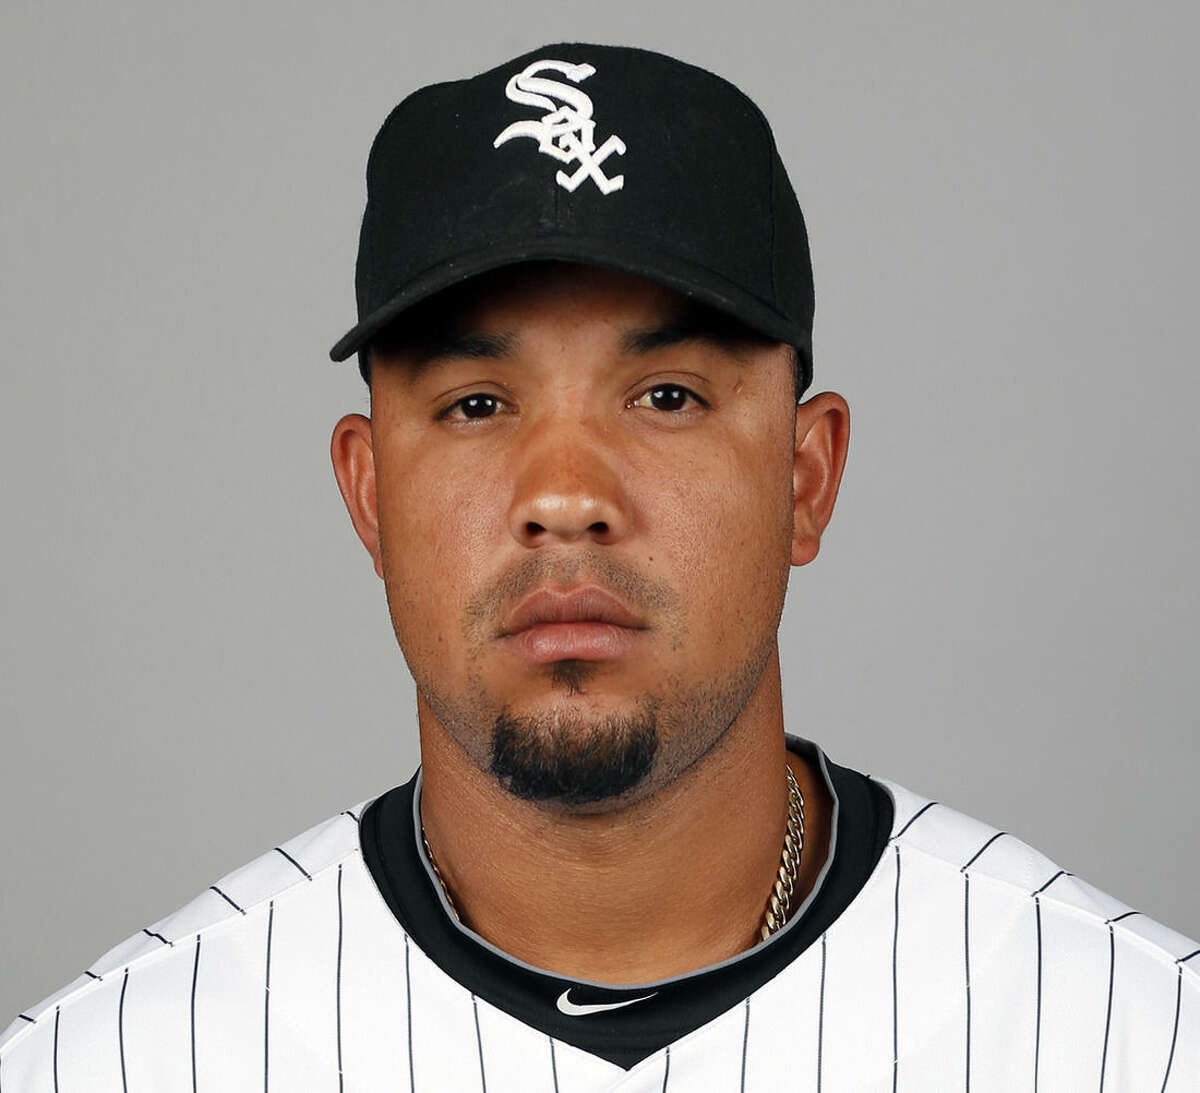 FILE - This is a 2014 photo showing Jose Abreu of the Chicago White Sox baseball team. Abreu was a unanimous winner of the AL Rookie of the Year award, Monday Nov. 10, 2014 (AP Photo/Paul Sancya, File)